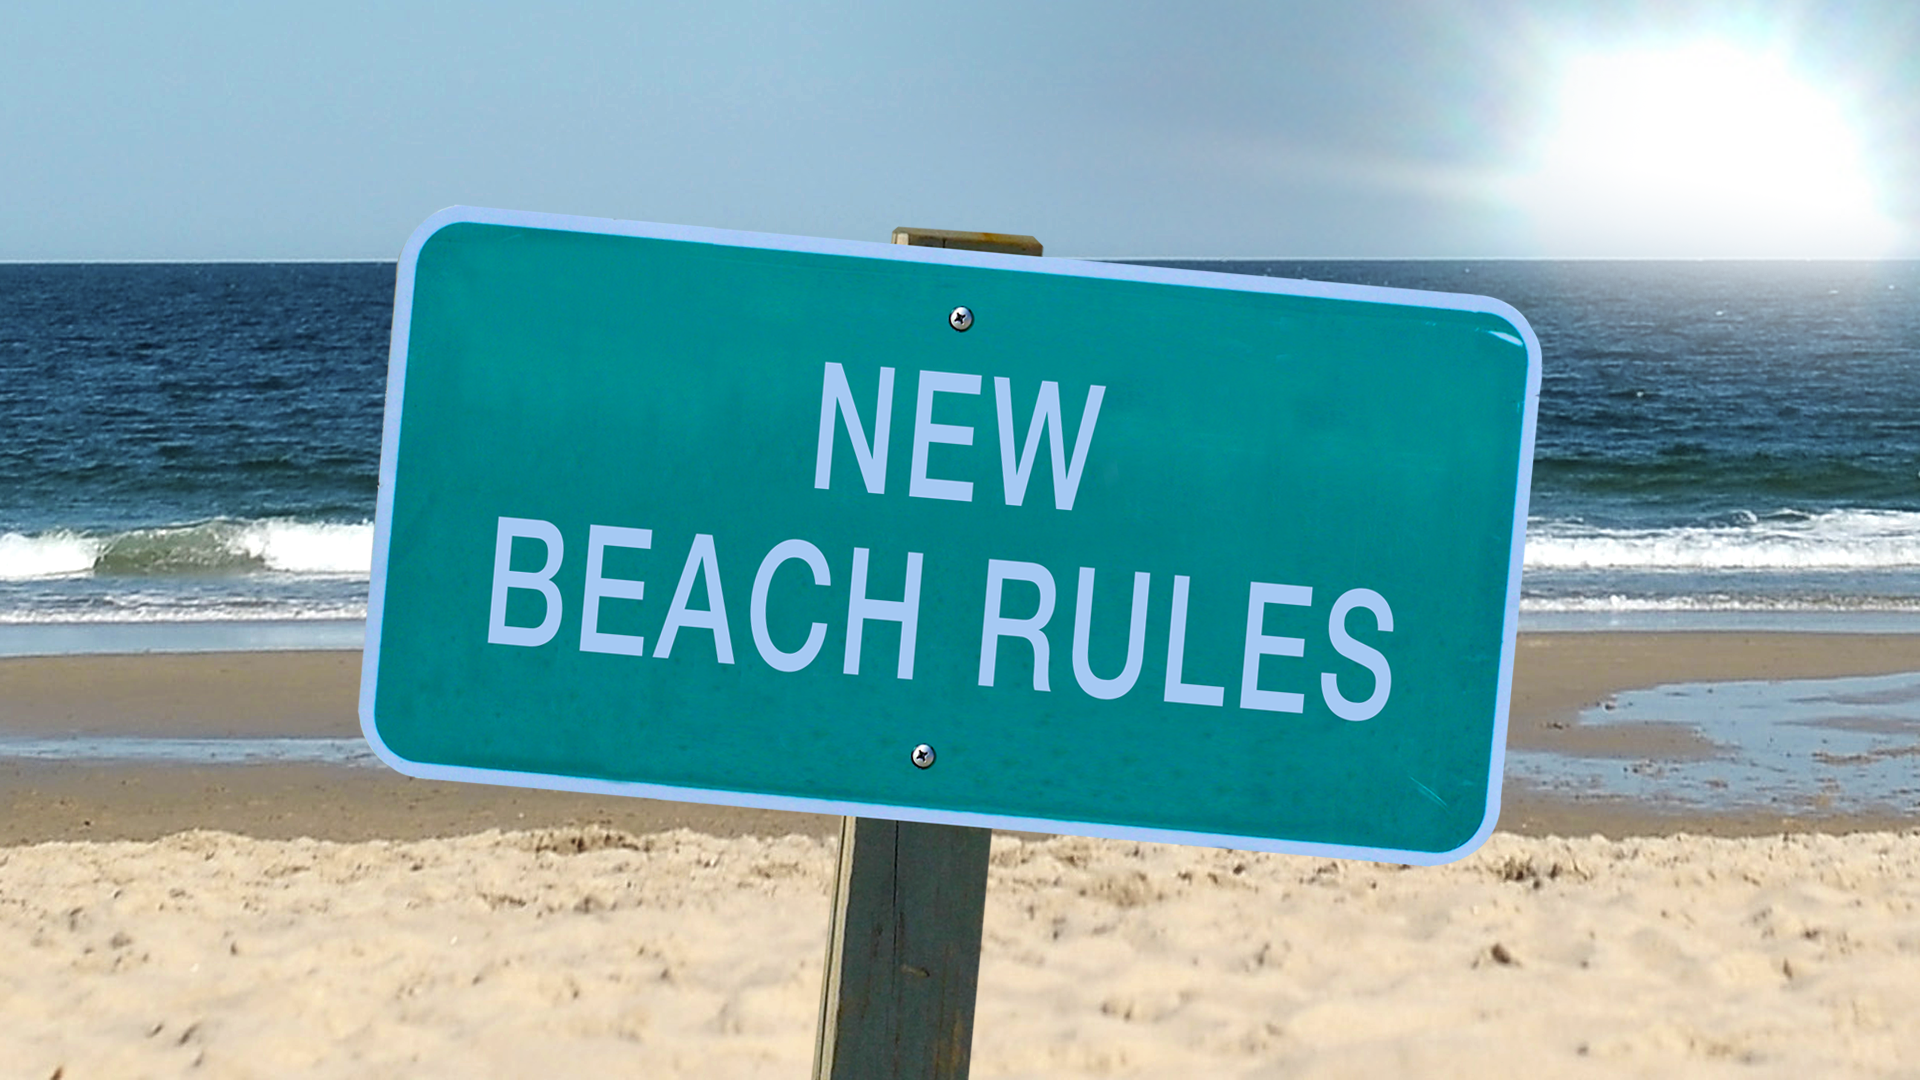 Seaside Heights passes new curfew to stop rowdy beach crowds